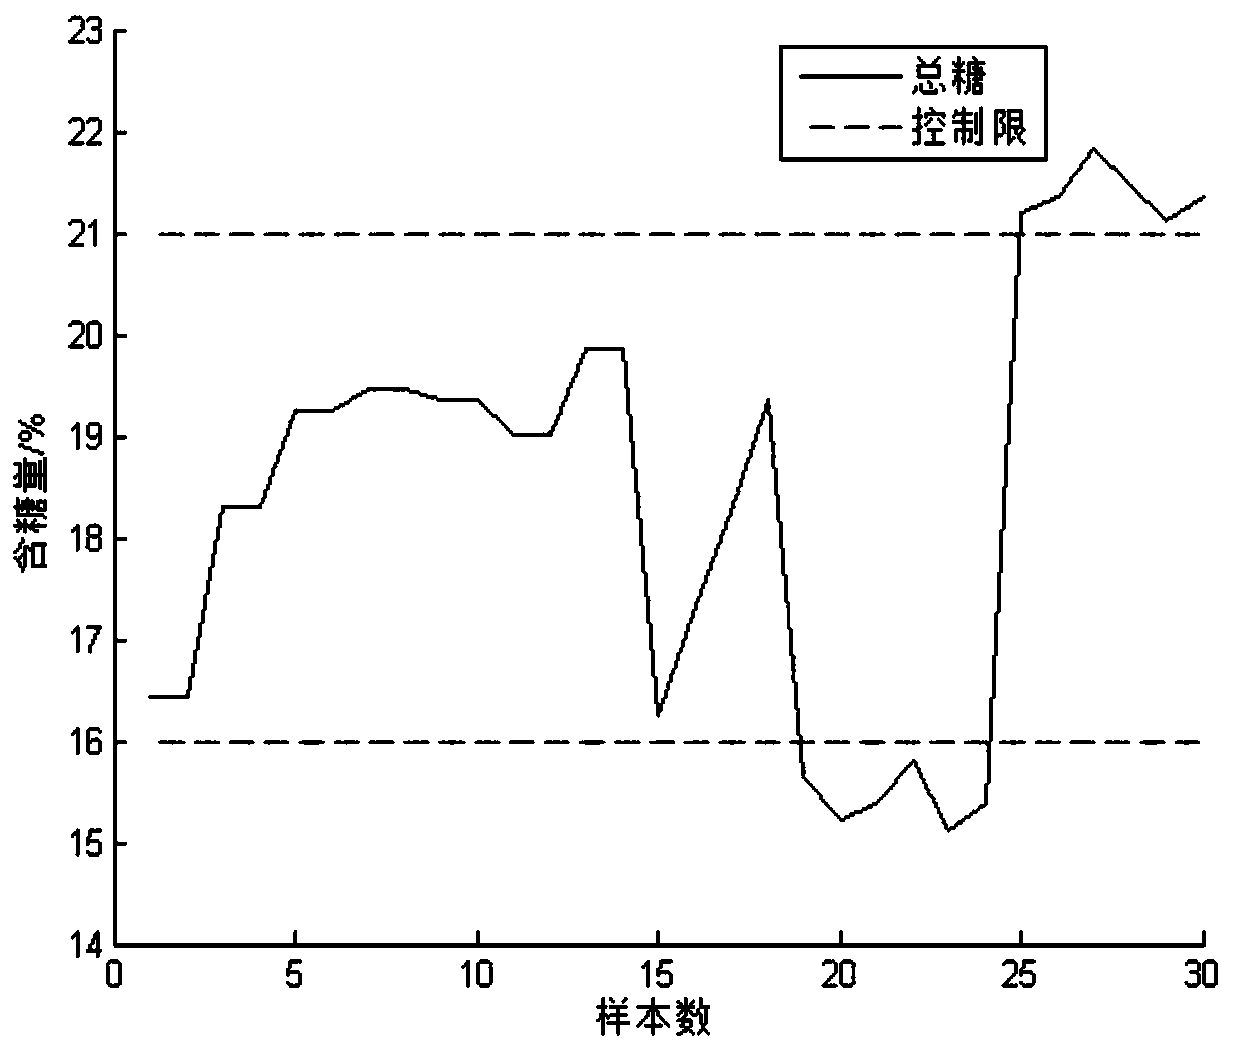 Statistical monitoring method of citric acid fermentation liquefaction clear liquid based on near infrared spectroscopy